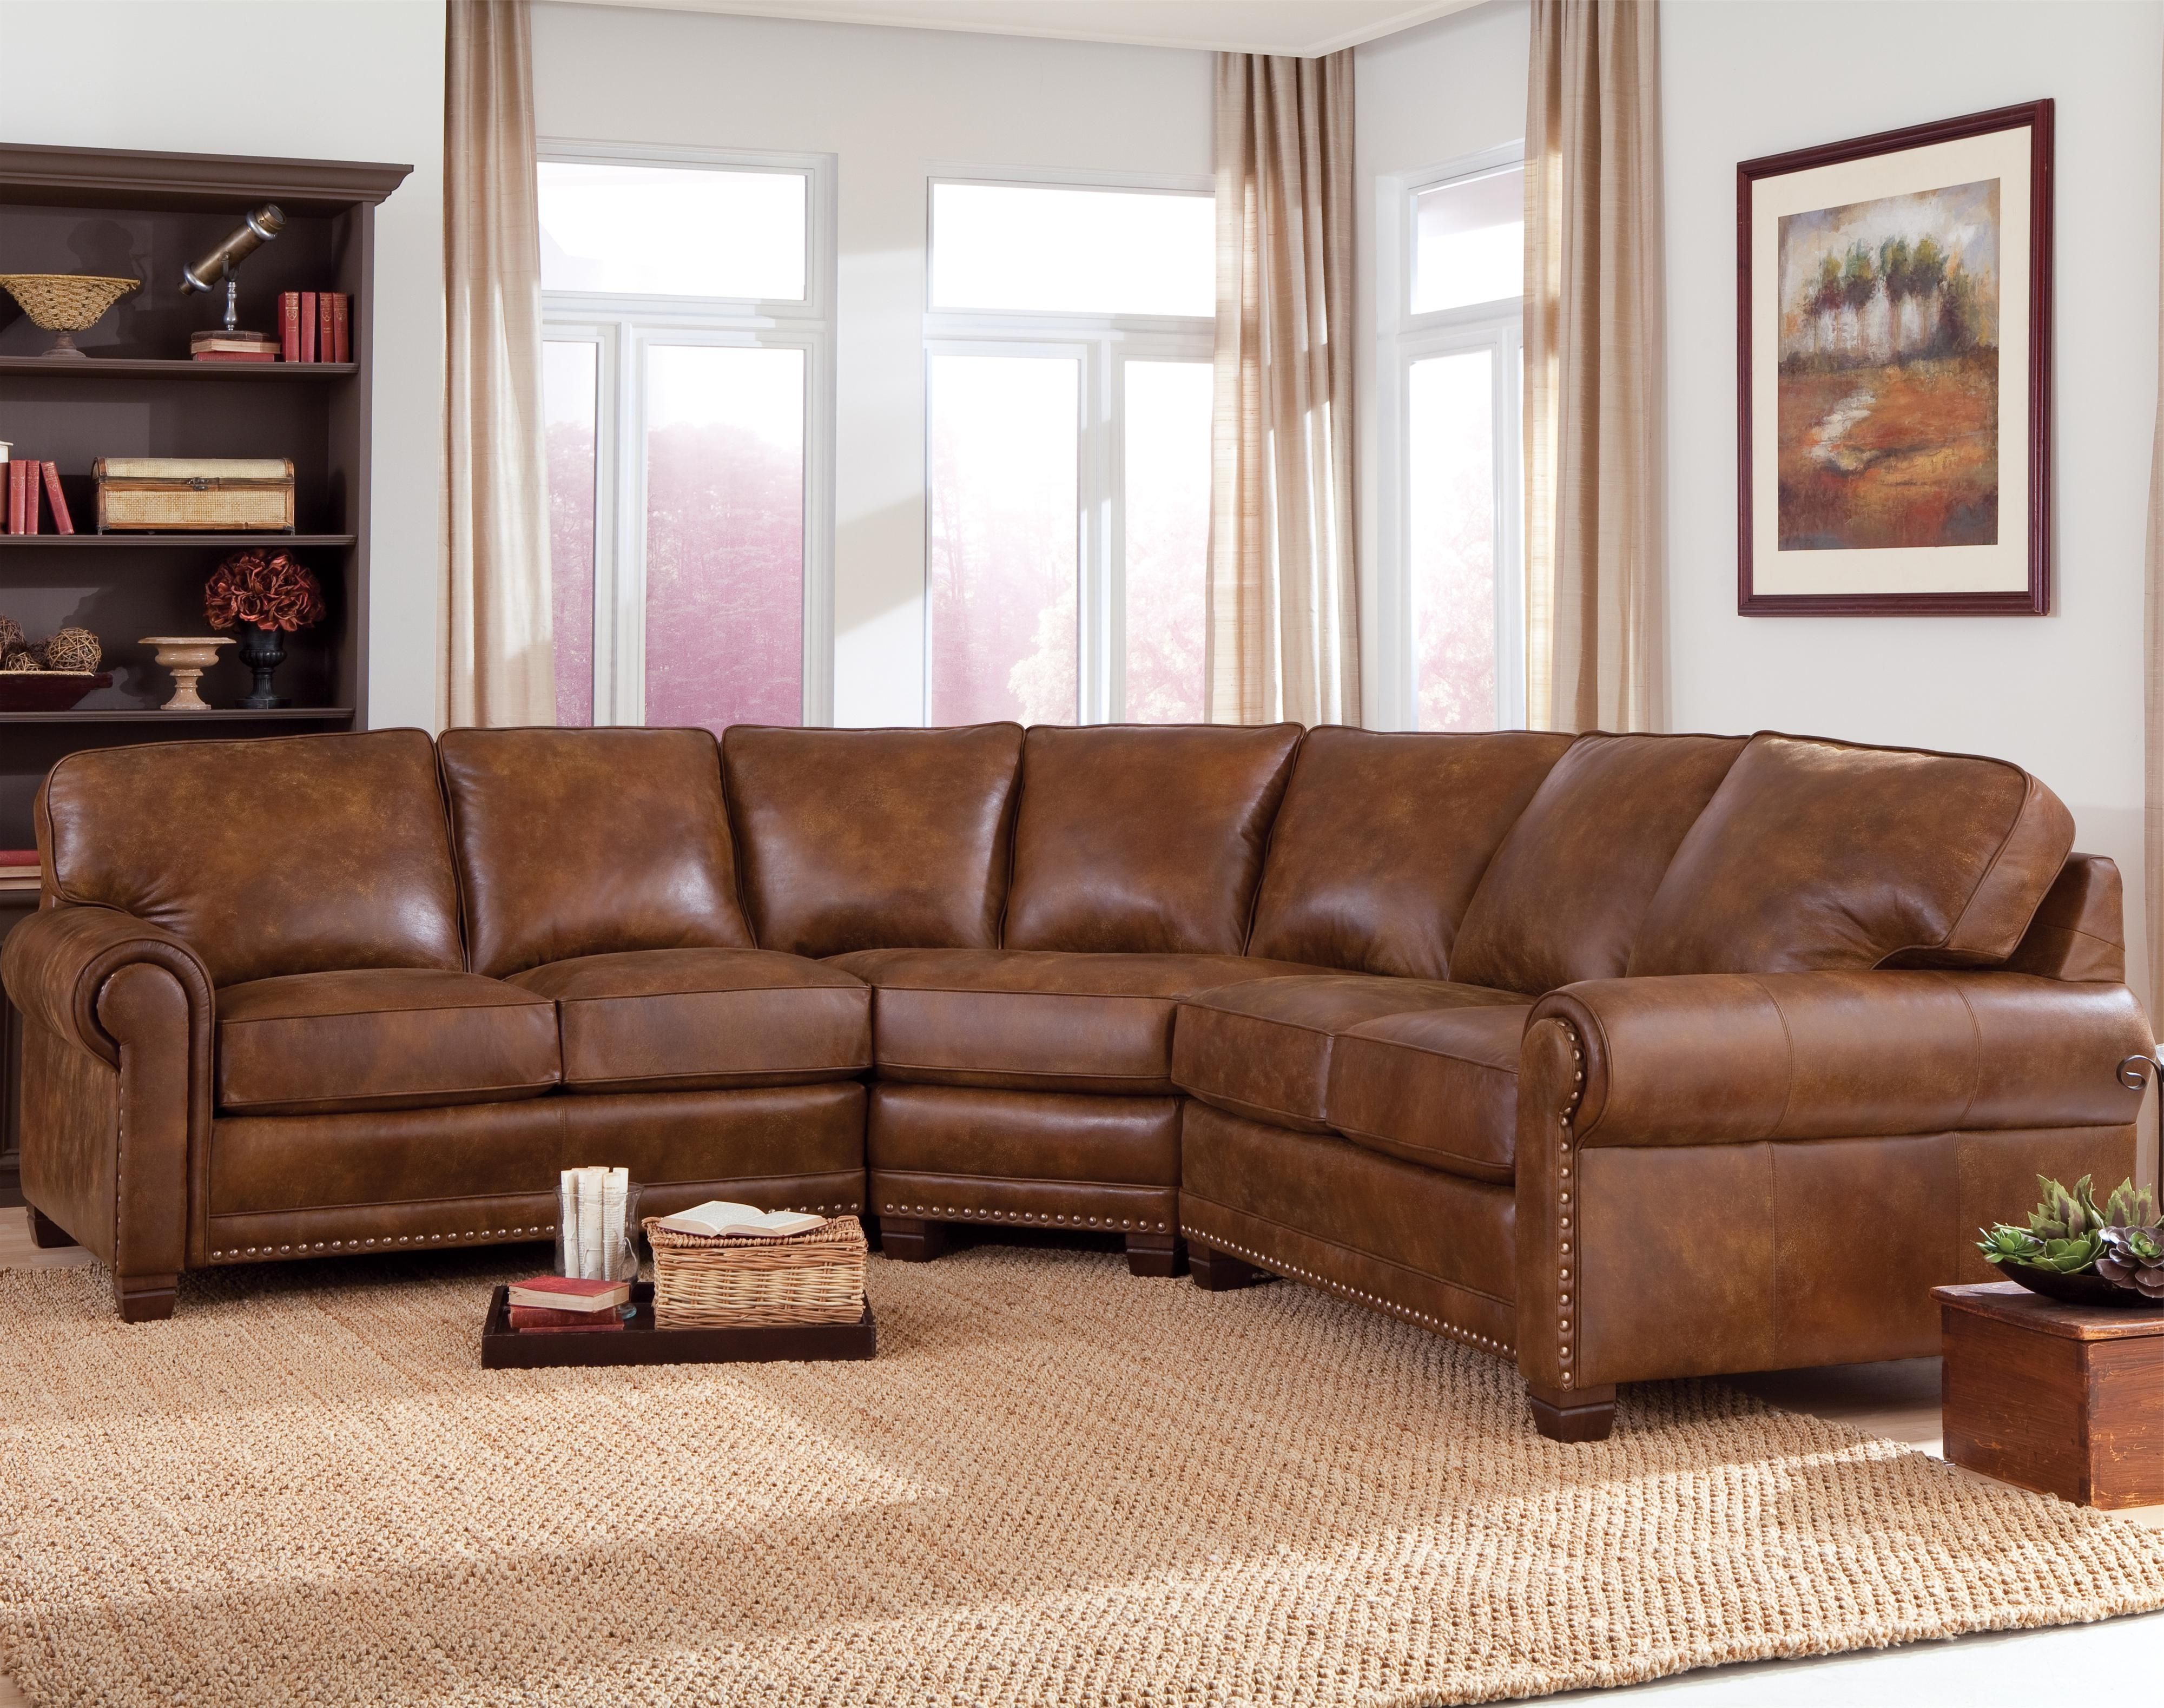 Widely Used Traditional 3 Piece Sectional Sofa With Nailhead Trimsmith Within Sectional Sofas Under  (View 14 of 20)